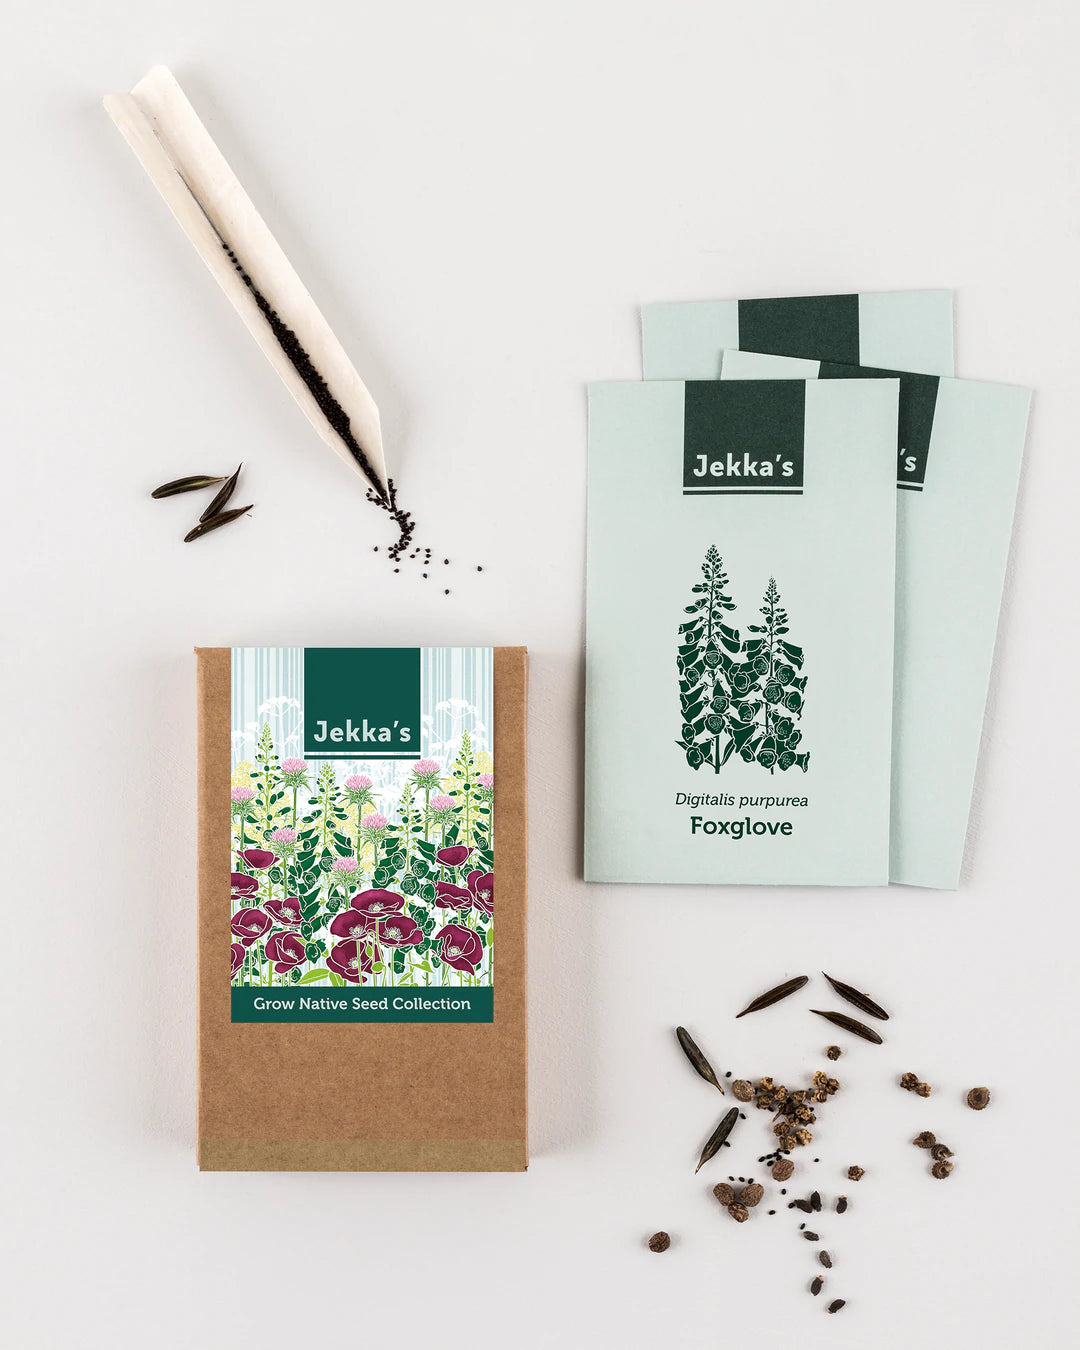 Jekka’s Grow Native Seed Collection - The Bristol Artisan Handmade Sustainable Gifts and Homewares.